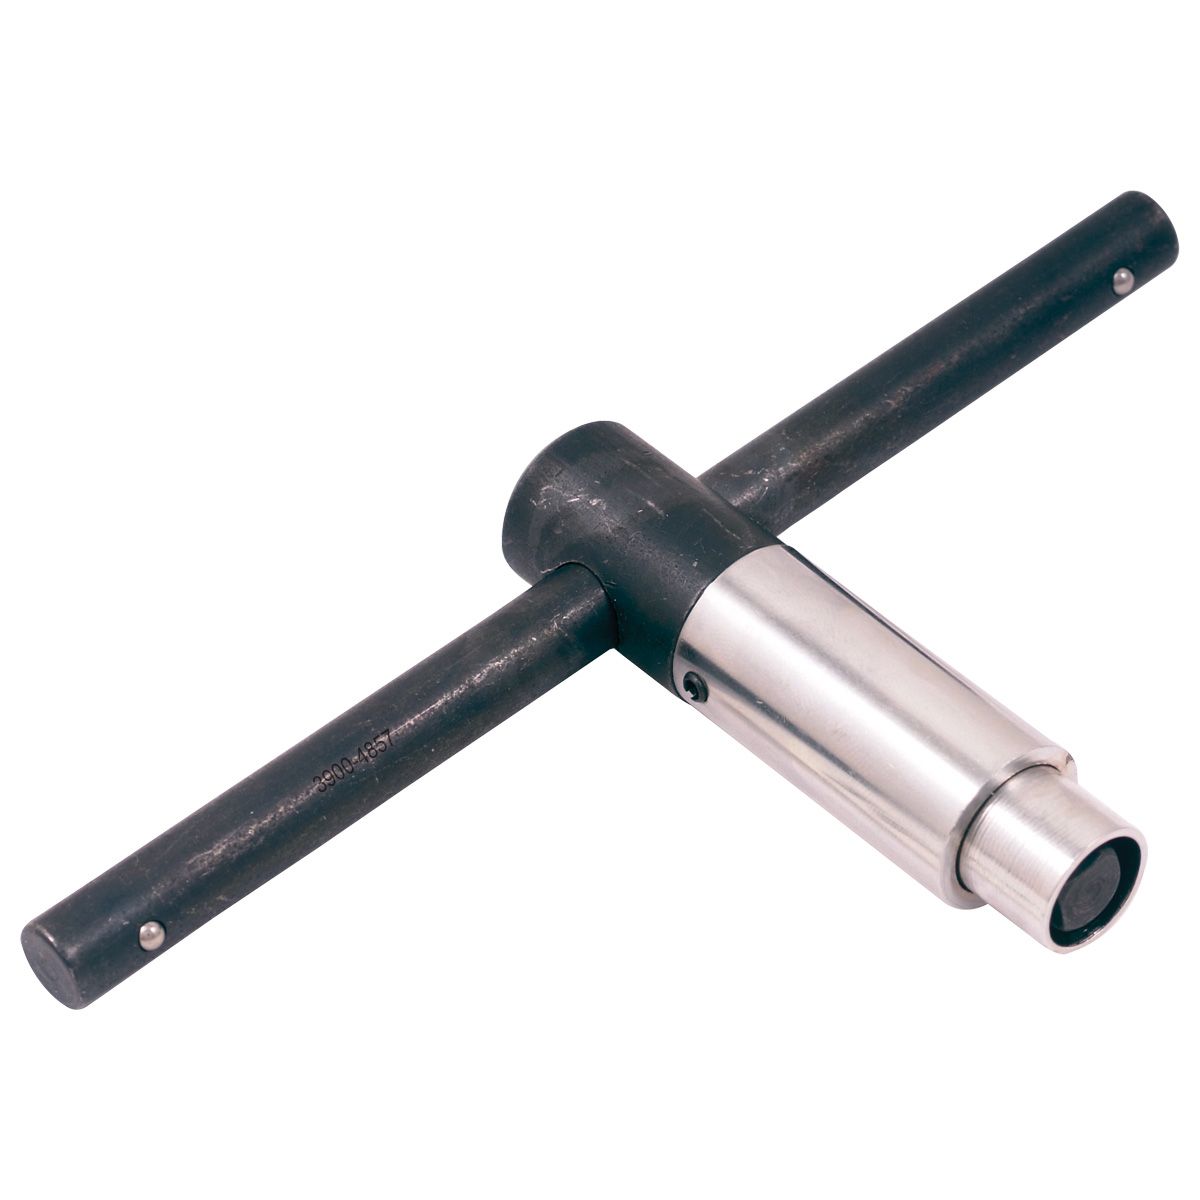 5/16" SQUARE HEAD SELF-EJECTING LATHE CHUCK WRENCH (3900-4857)